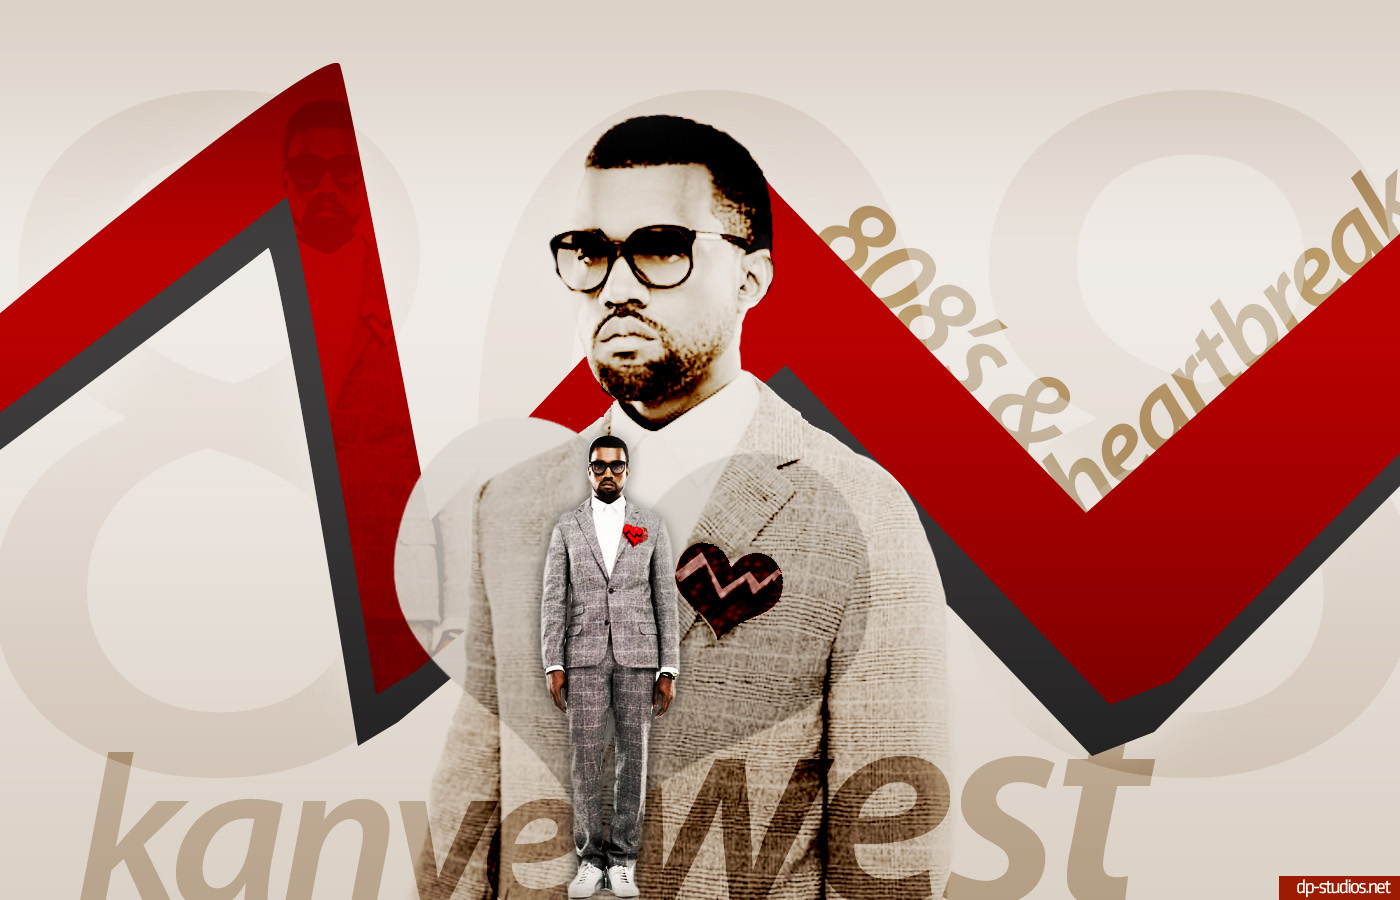 Kanye West 808s And Heartbreak S By Dp16